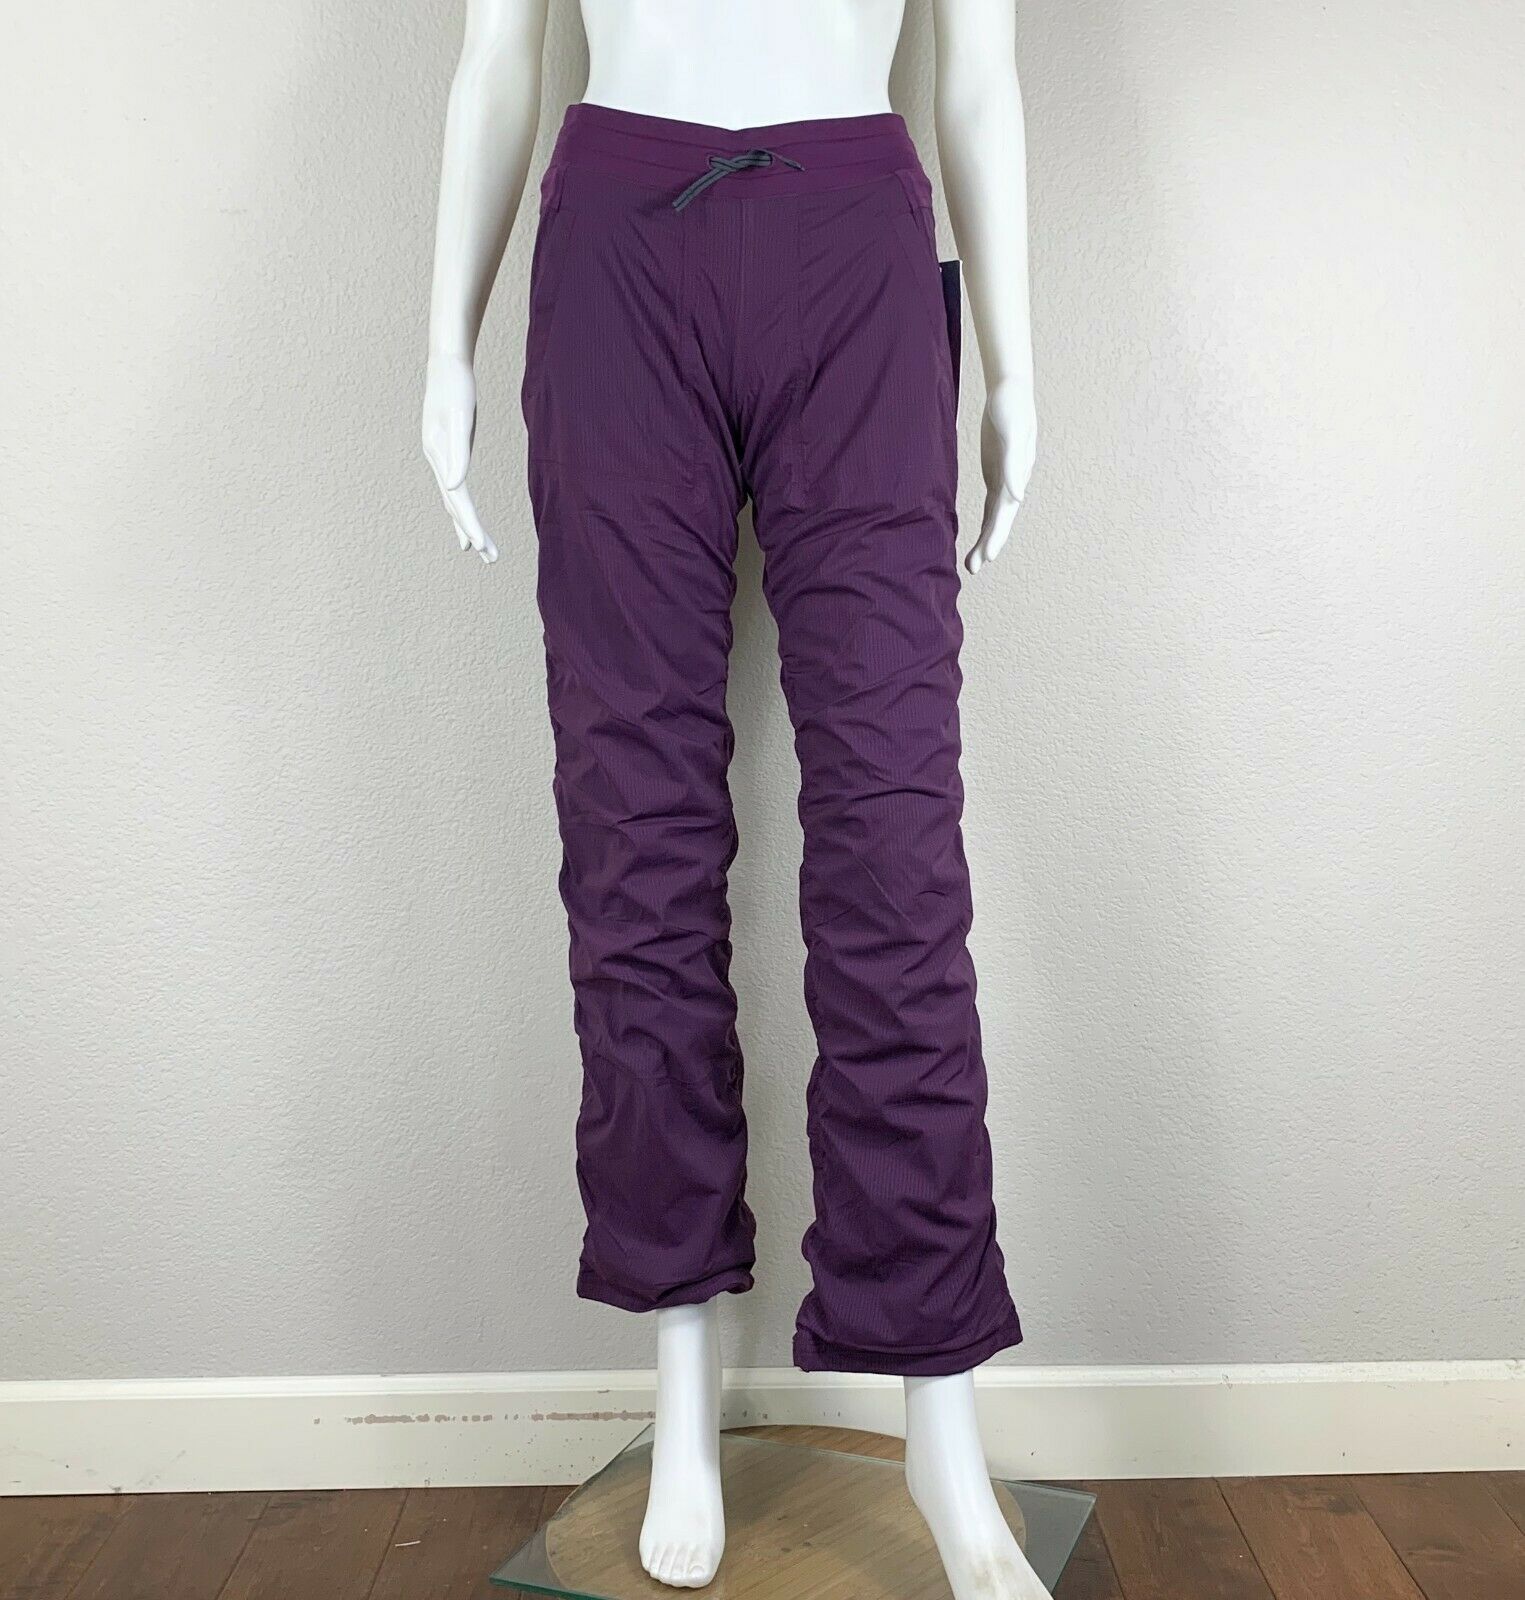 Ivivva By Lululemon Live To Move Pant *lined Nwt New Purple Girl's Size 12 Ntsf